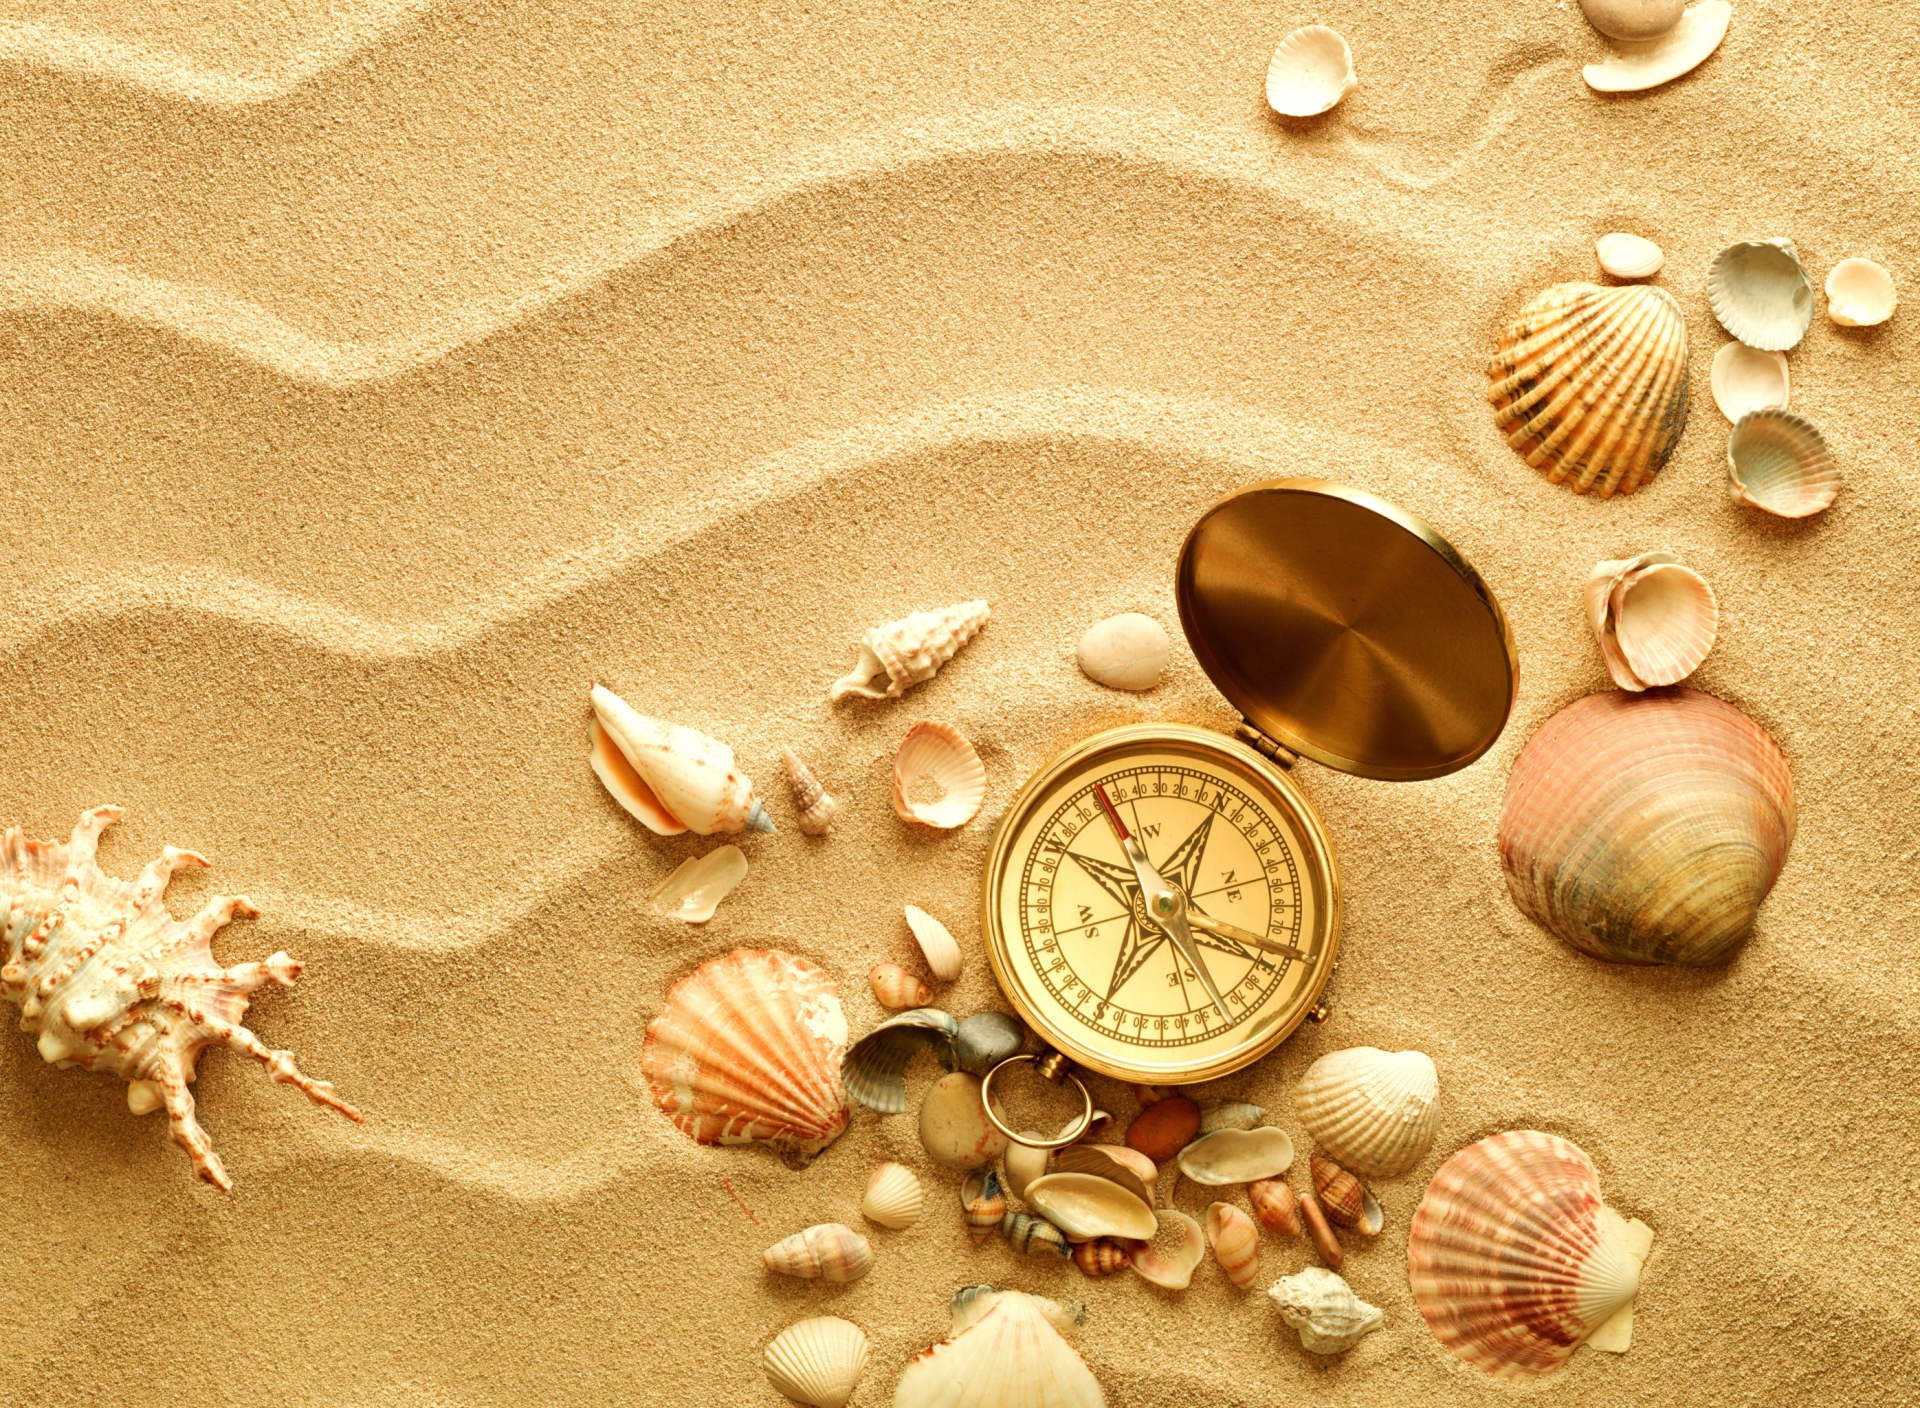 Das Compass And Shells On Sand Wallpaper 1920x1408